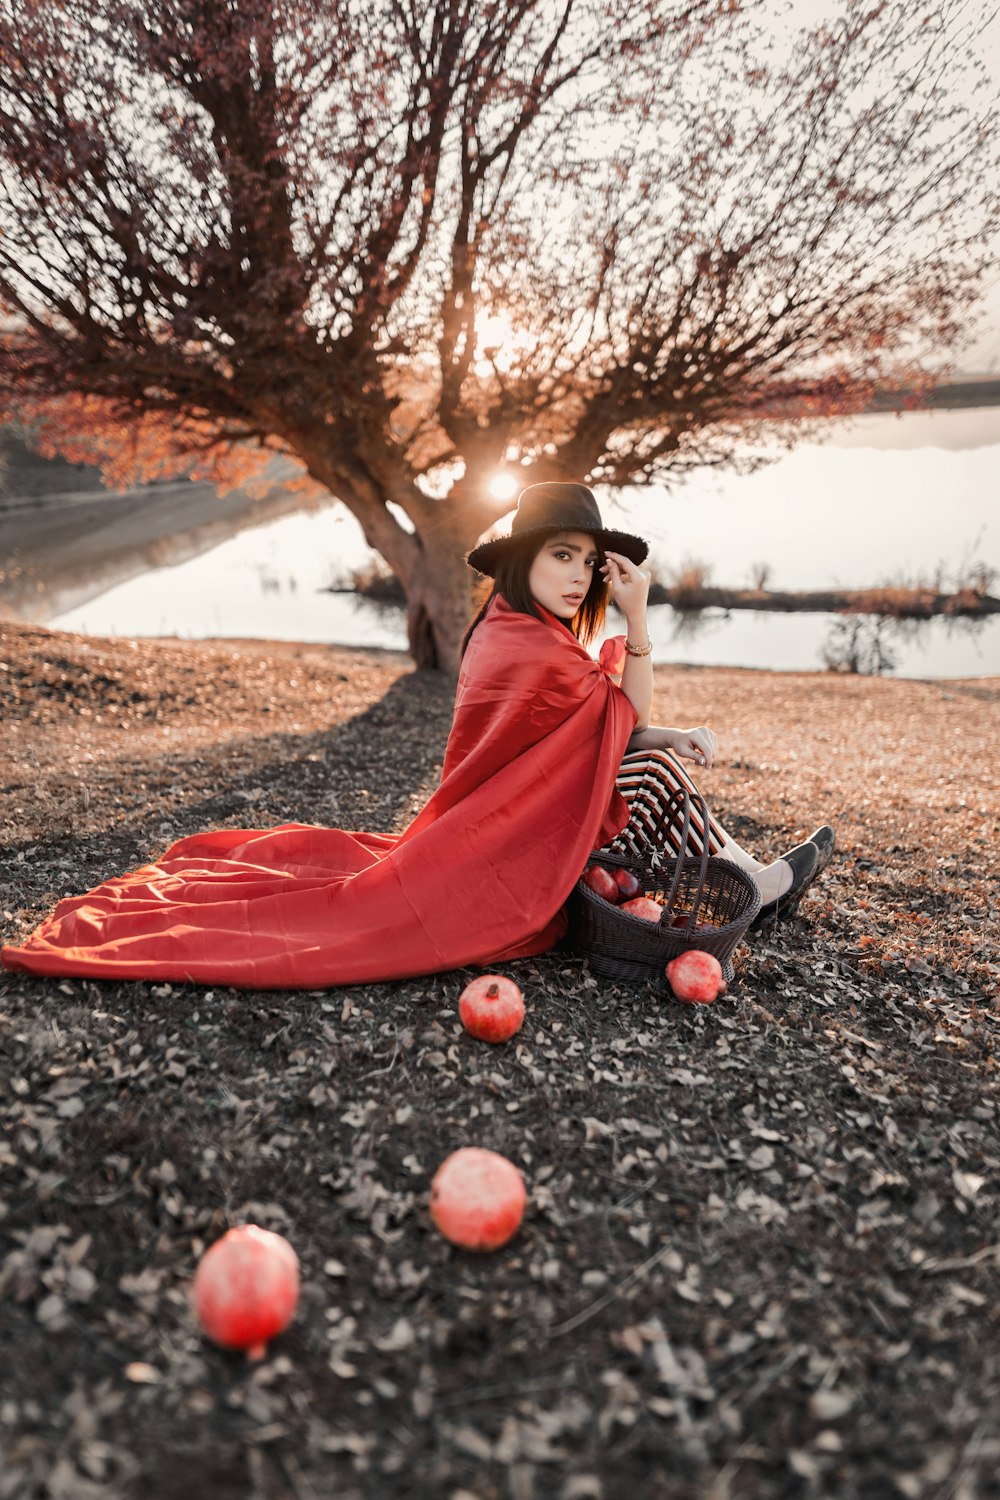 woman sitting beside basket of apples and apples on ground